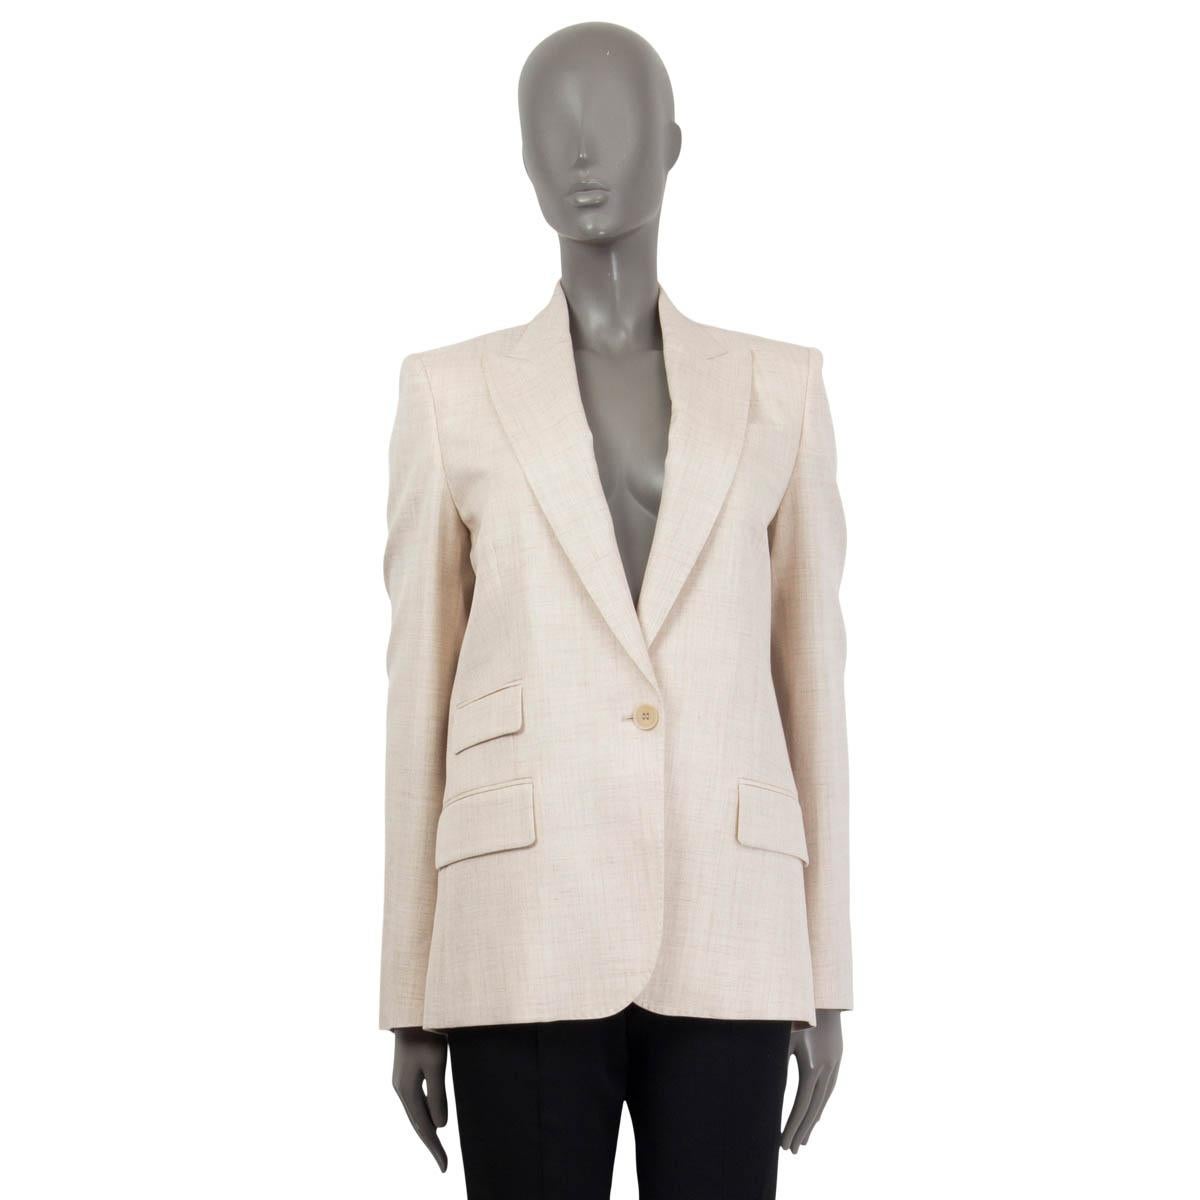 100% authentic Stella McCartney 'Bell' oversized single button blazer in off-white, light sand and gray viscose (86%) and linen (14%). Features buttoned cuffs and three sewn shut flap pockets on the front. Opens with one button on the front. Lined